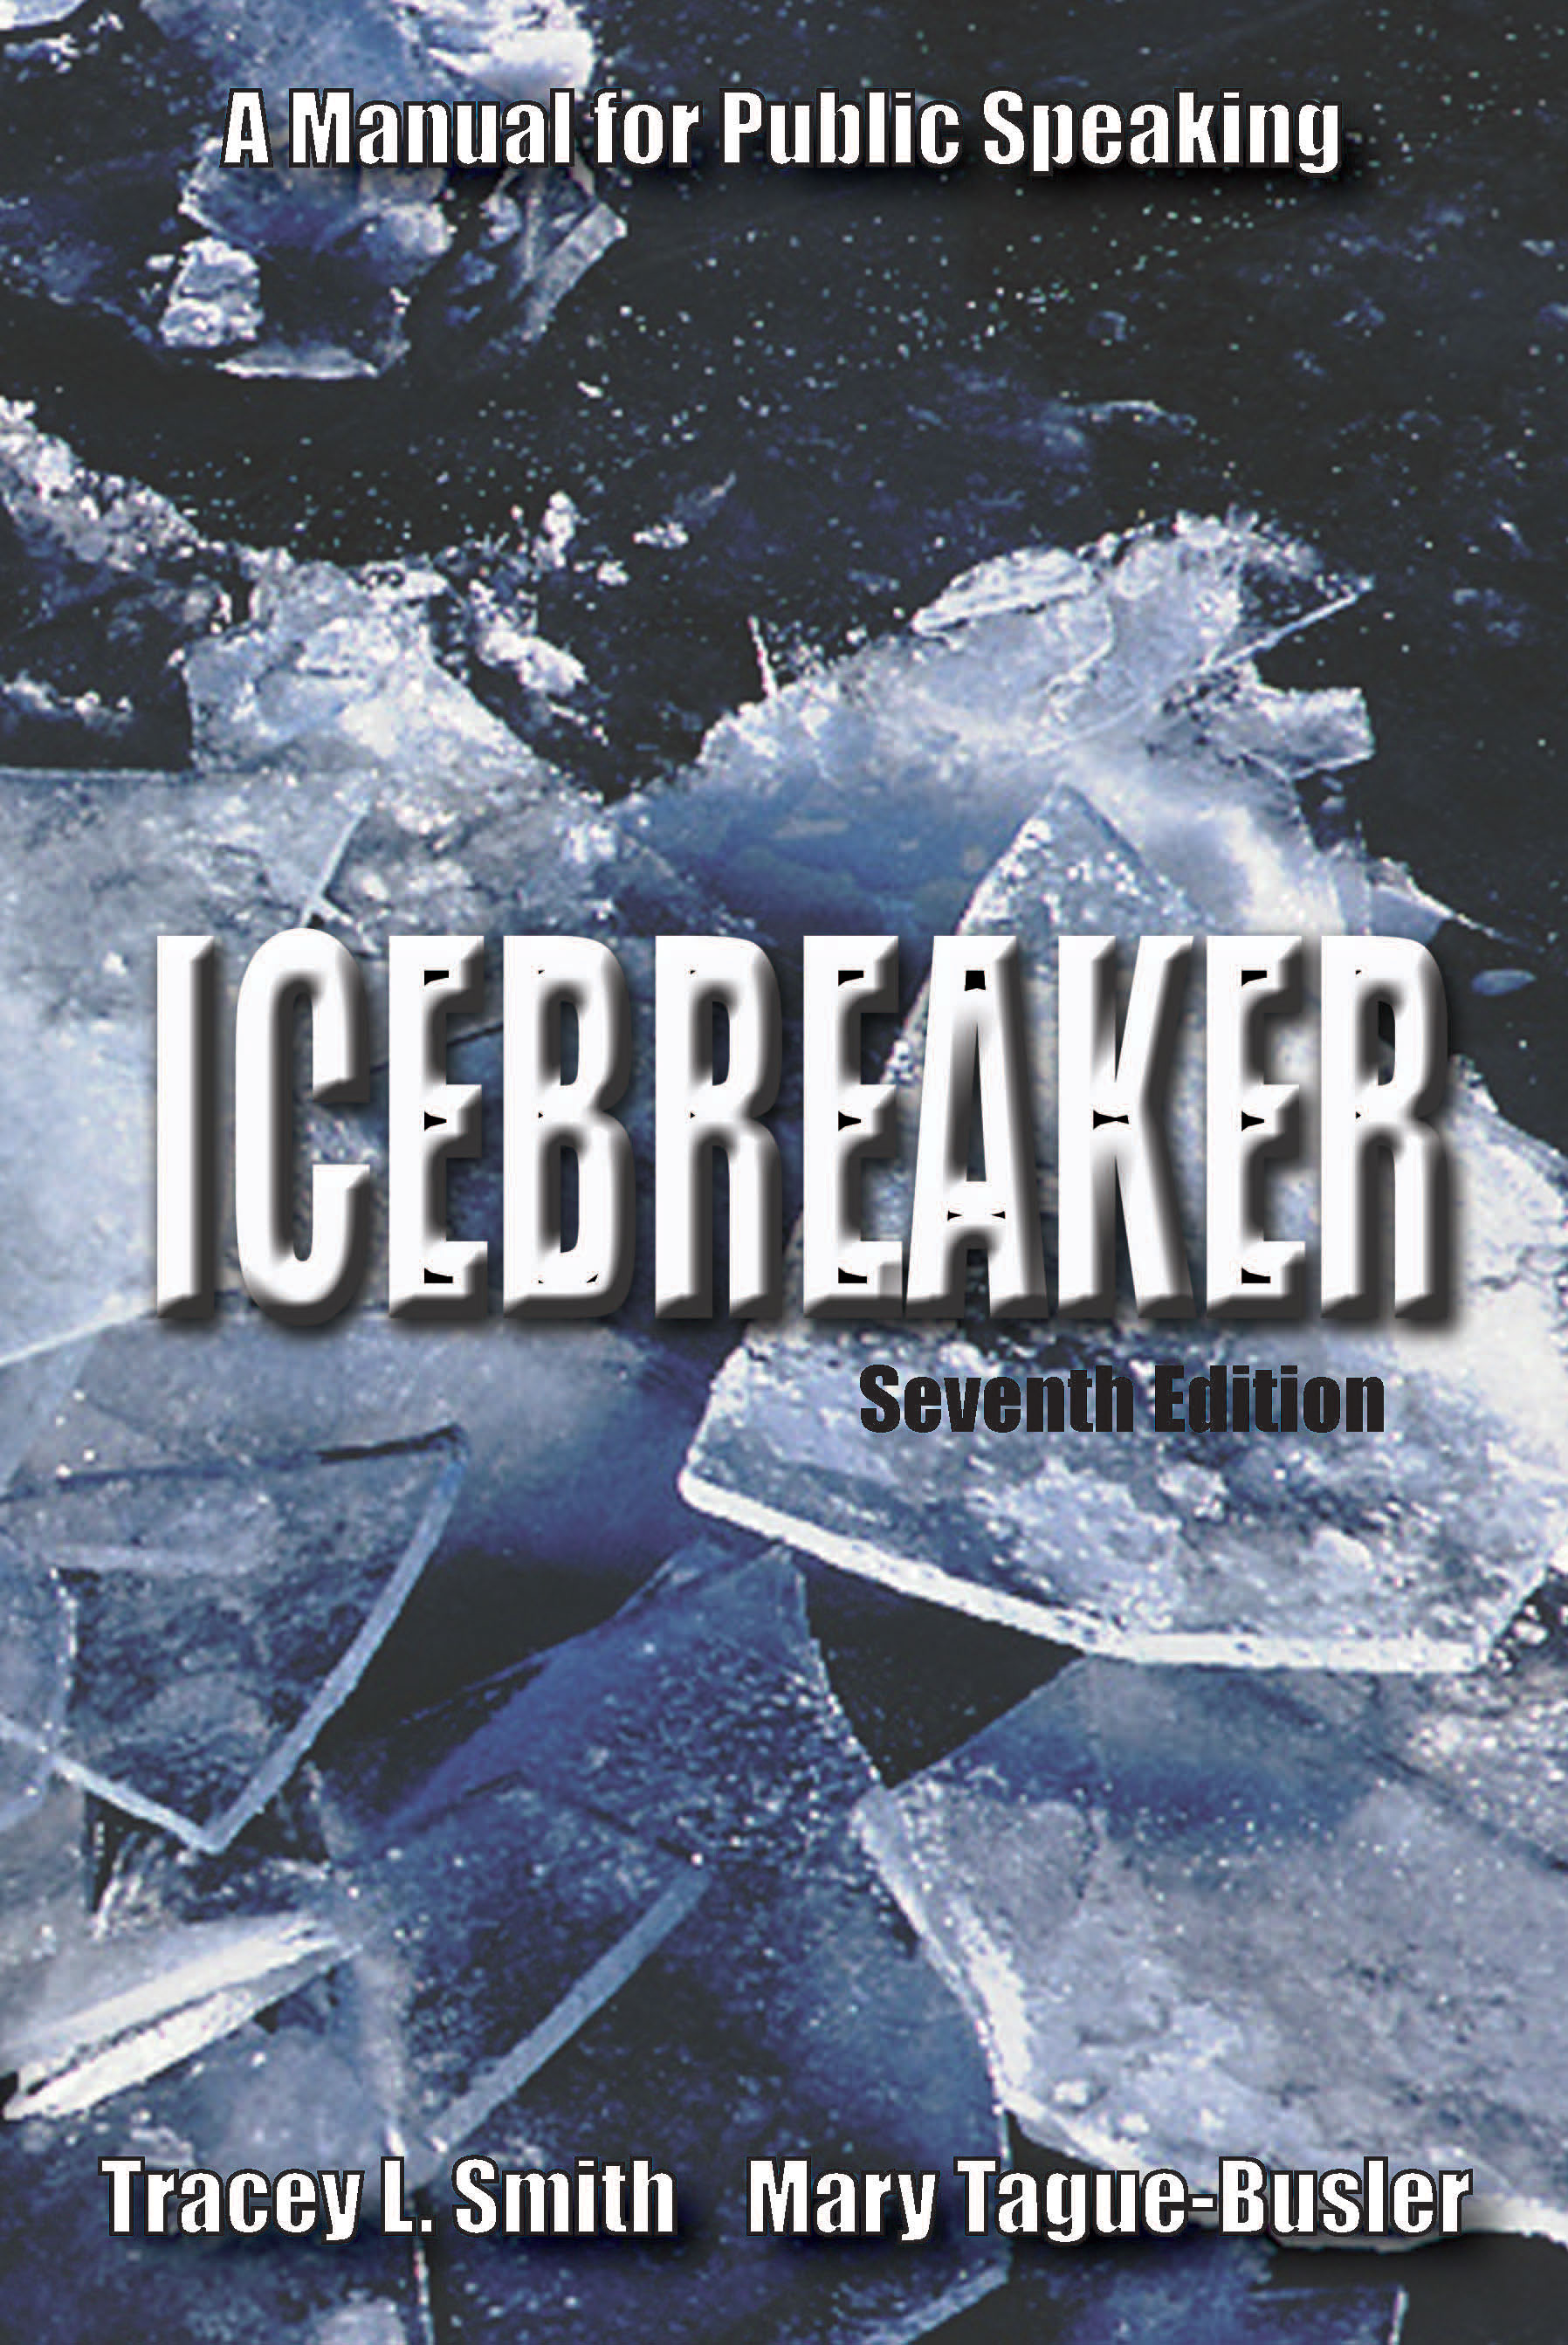 Icebreaker: A Manual for Public Speaking by Tracey L. Smith, Mary  Tague-Busler